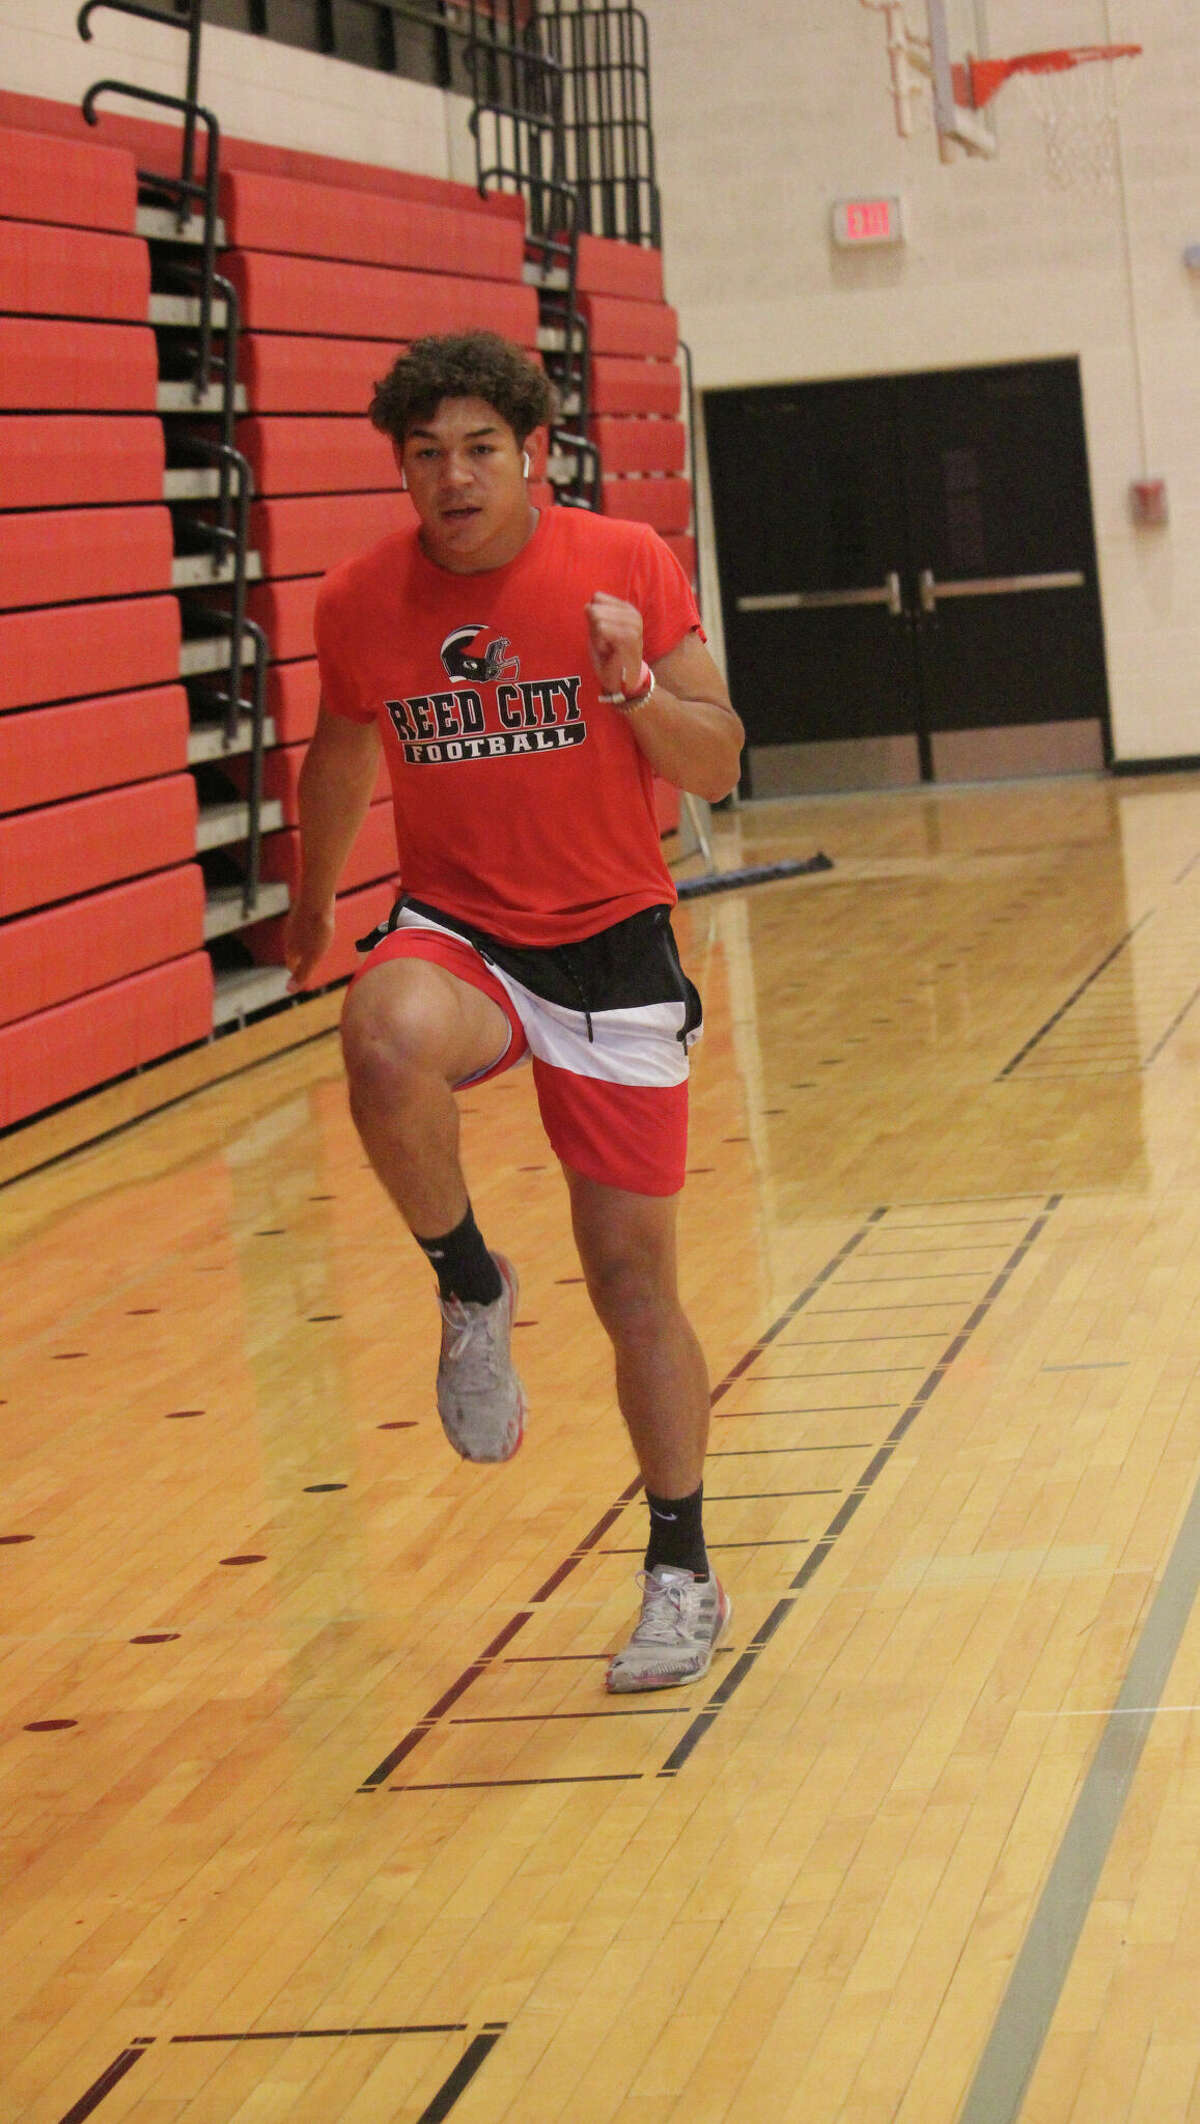 Bryson Hughes focuses on his footwork during a drill in the Reed City gymnasium last week.